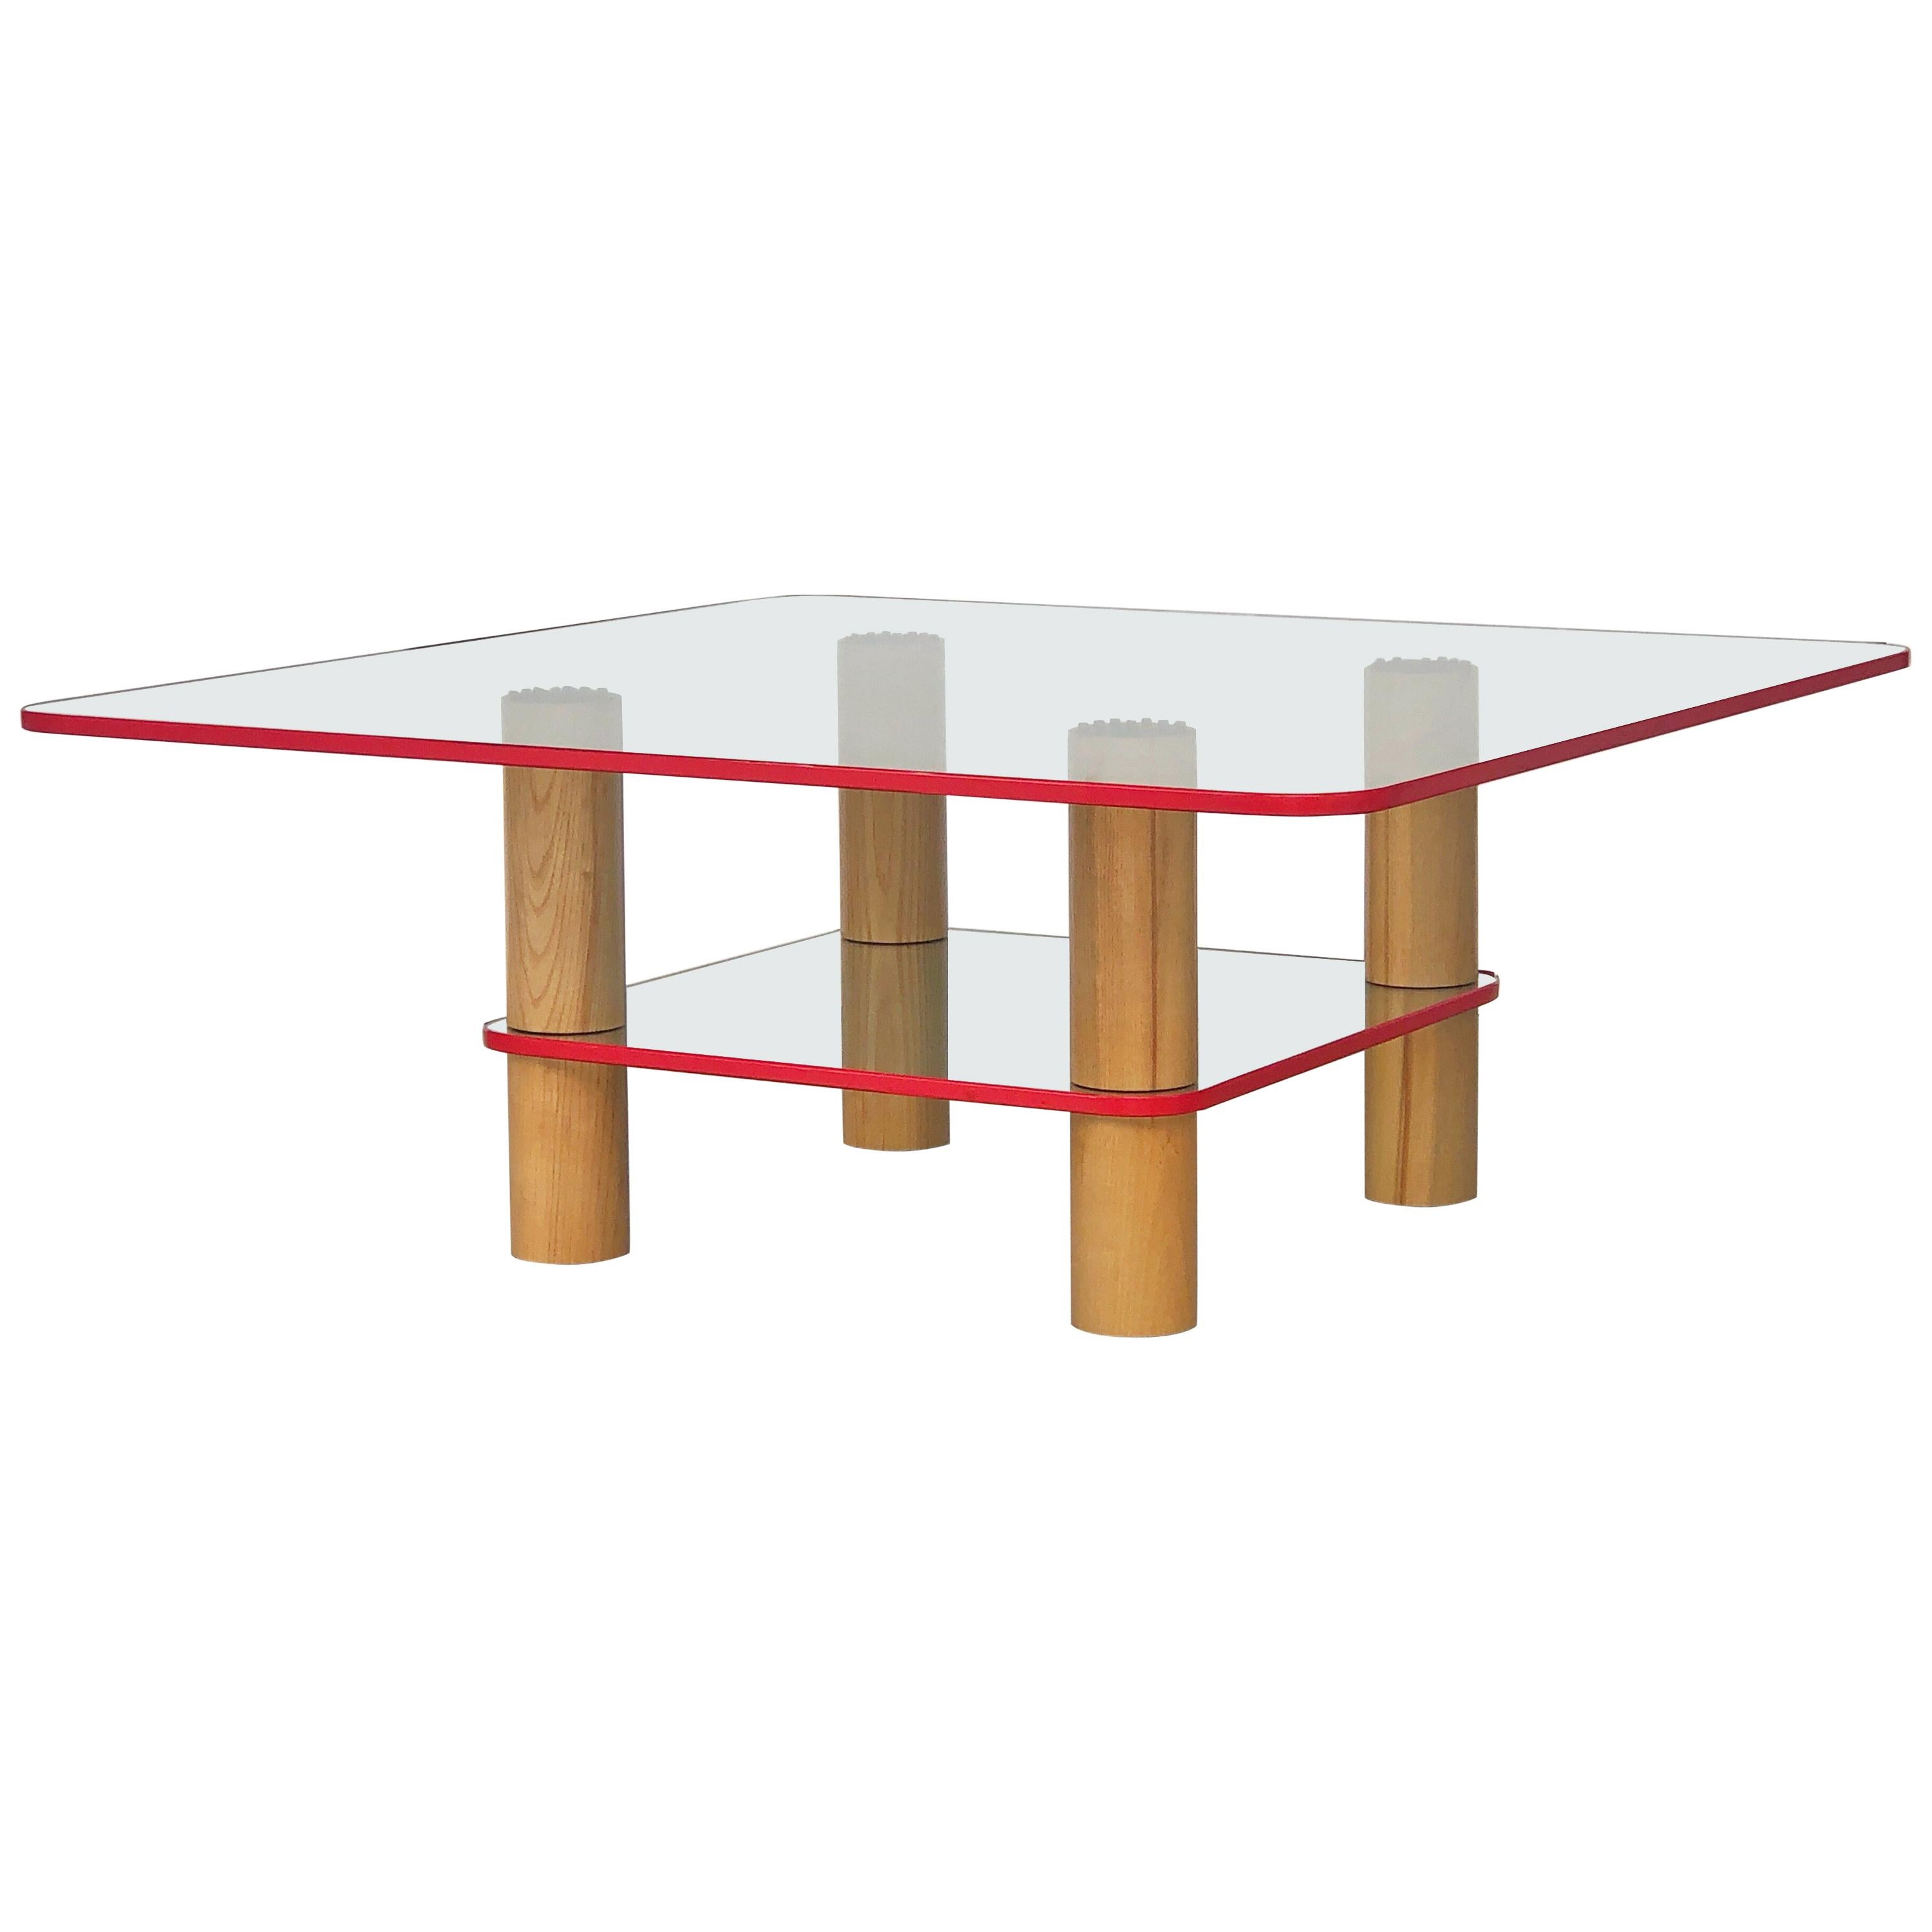 Post Modern Glass and Wood Coffee Table with Red Edge, 1980